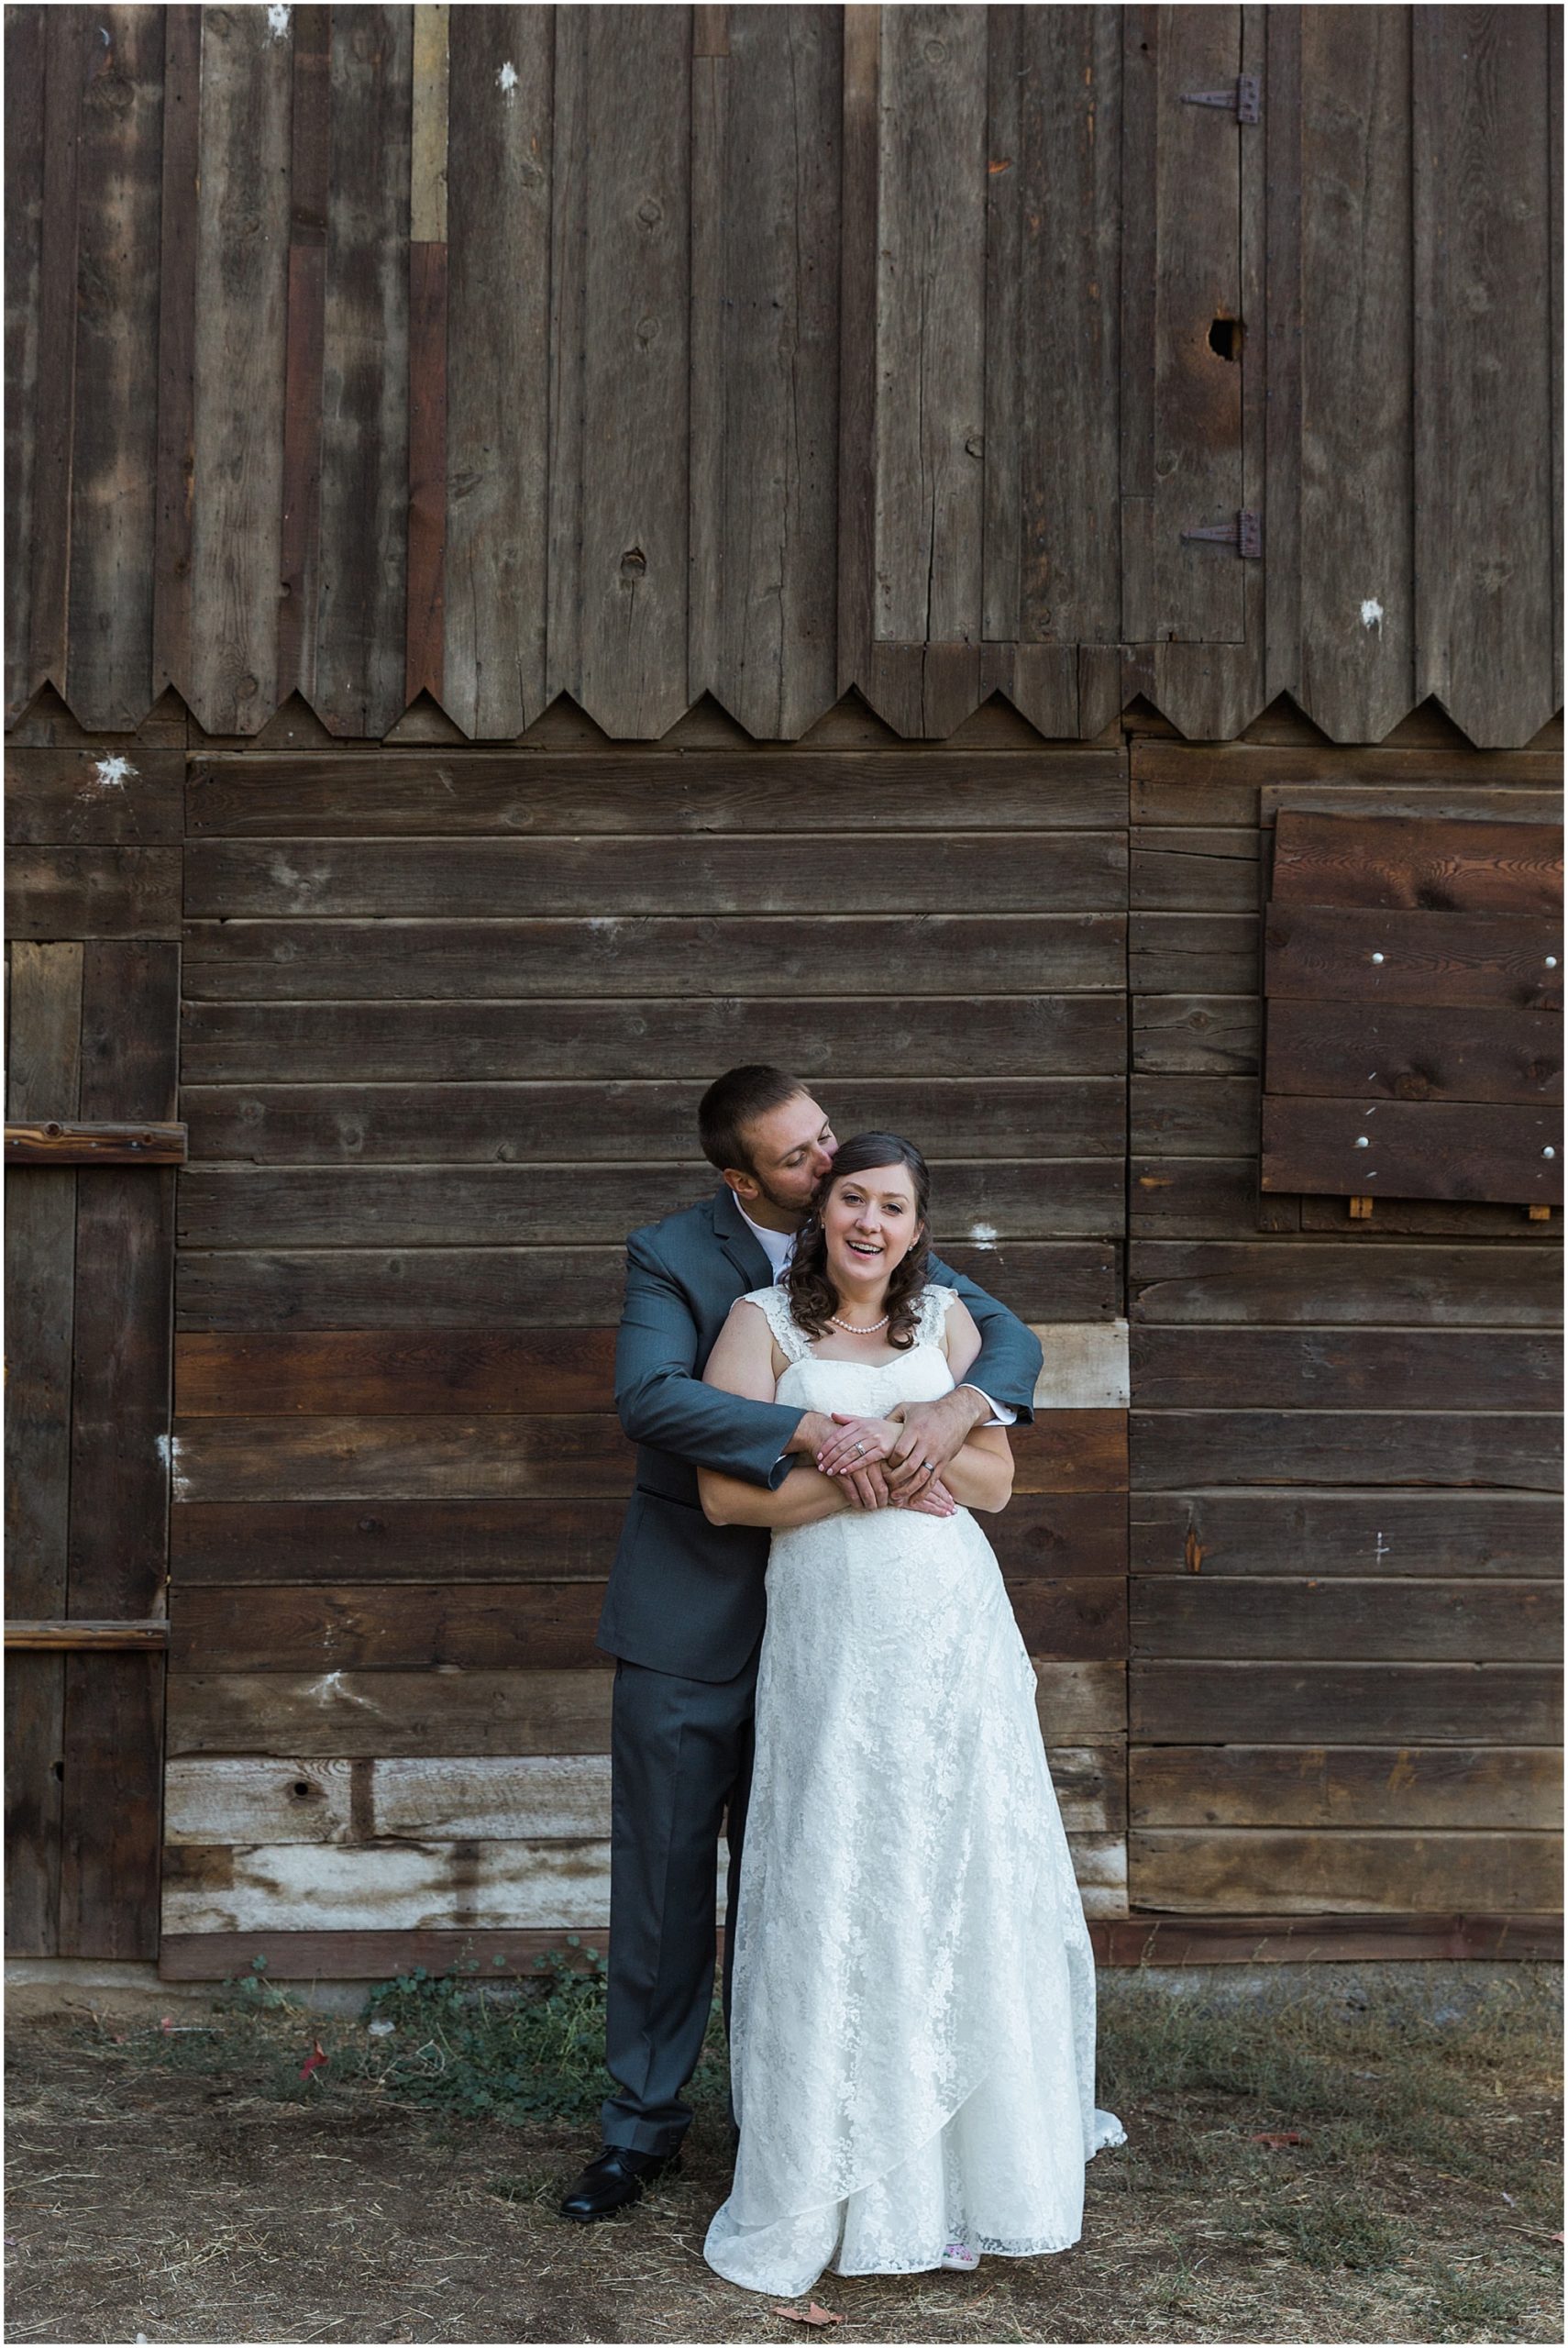 Newlyweds pose in front of the rustic barn at their wedding in Bend, Oregon's Hollinshead Park for their Hollinshead Barn fall wedding. | Erica Swantek Swantek